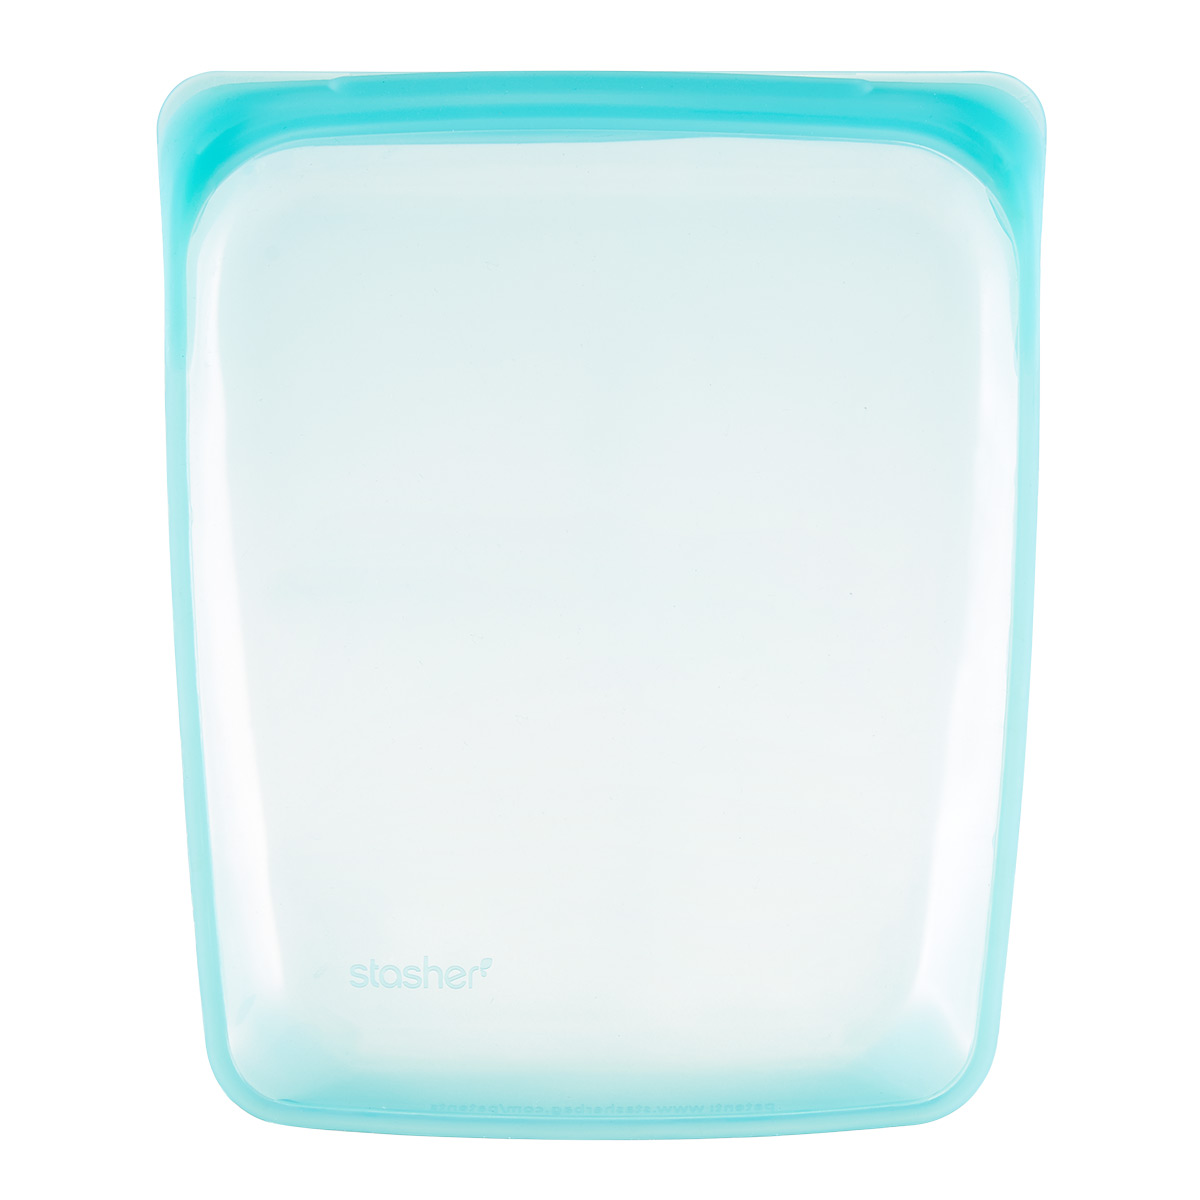 https://www.containerstore.com/catalogimages/387648/10081070-Stasher-reusable-silicone-s.jpg